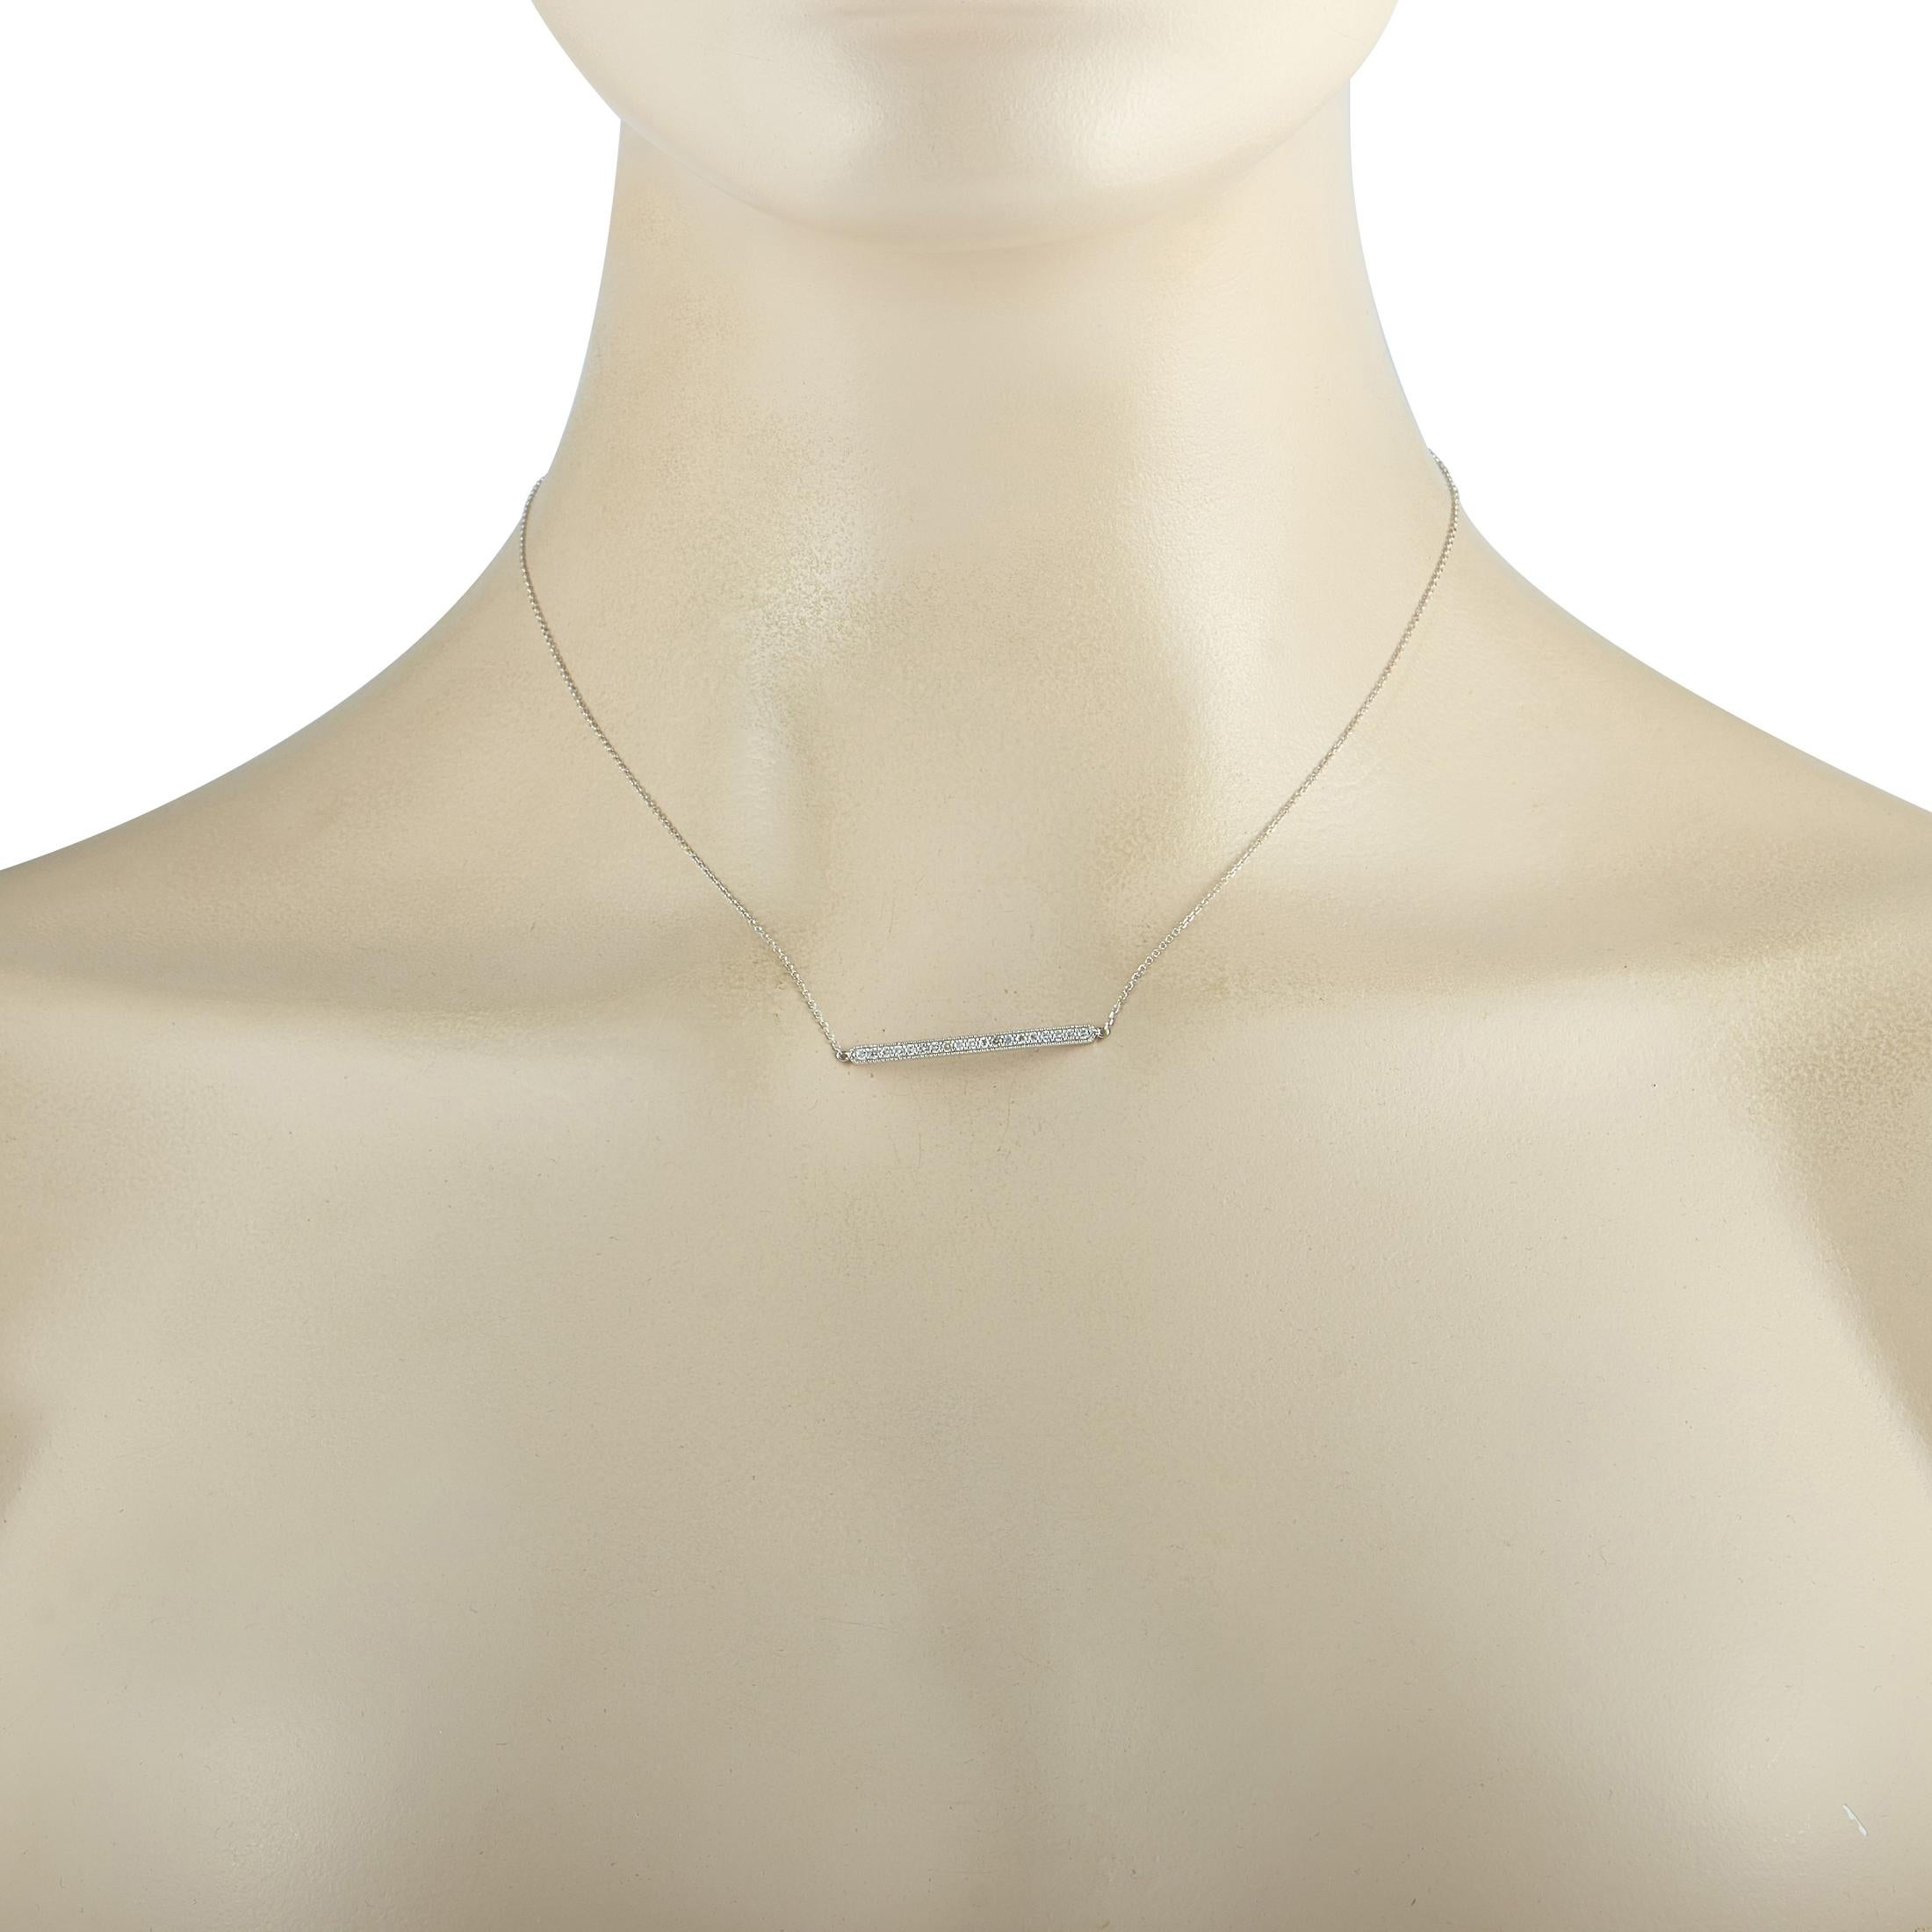 This LB Exclusive necklace is made of 14K white gold and embellished with diamonds that amount to 0.25 carats. The necklace weighs 2 grams and boasts a 15” chain and a pendant that measures 0.80” in length and 1.25” in width.
 
 Offered in brand new